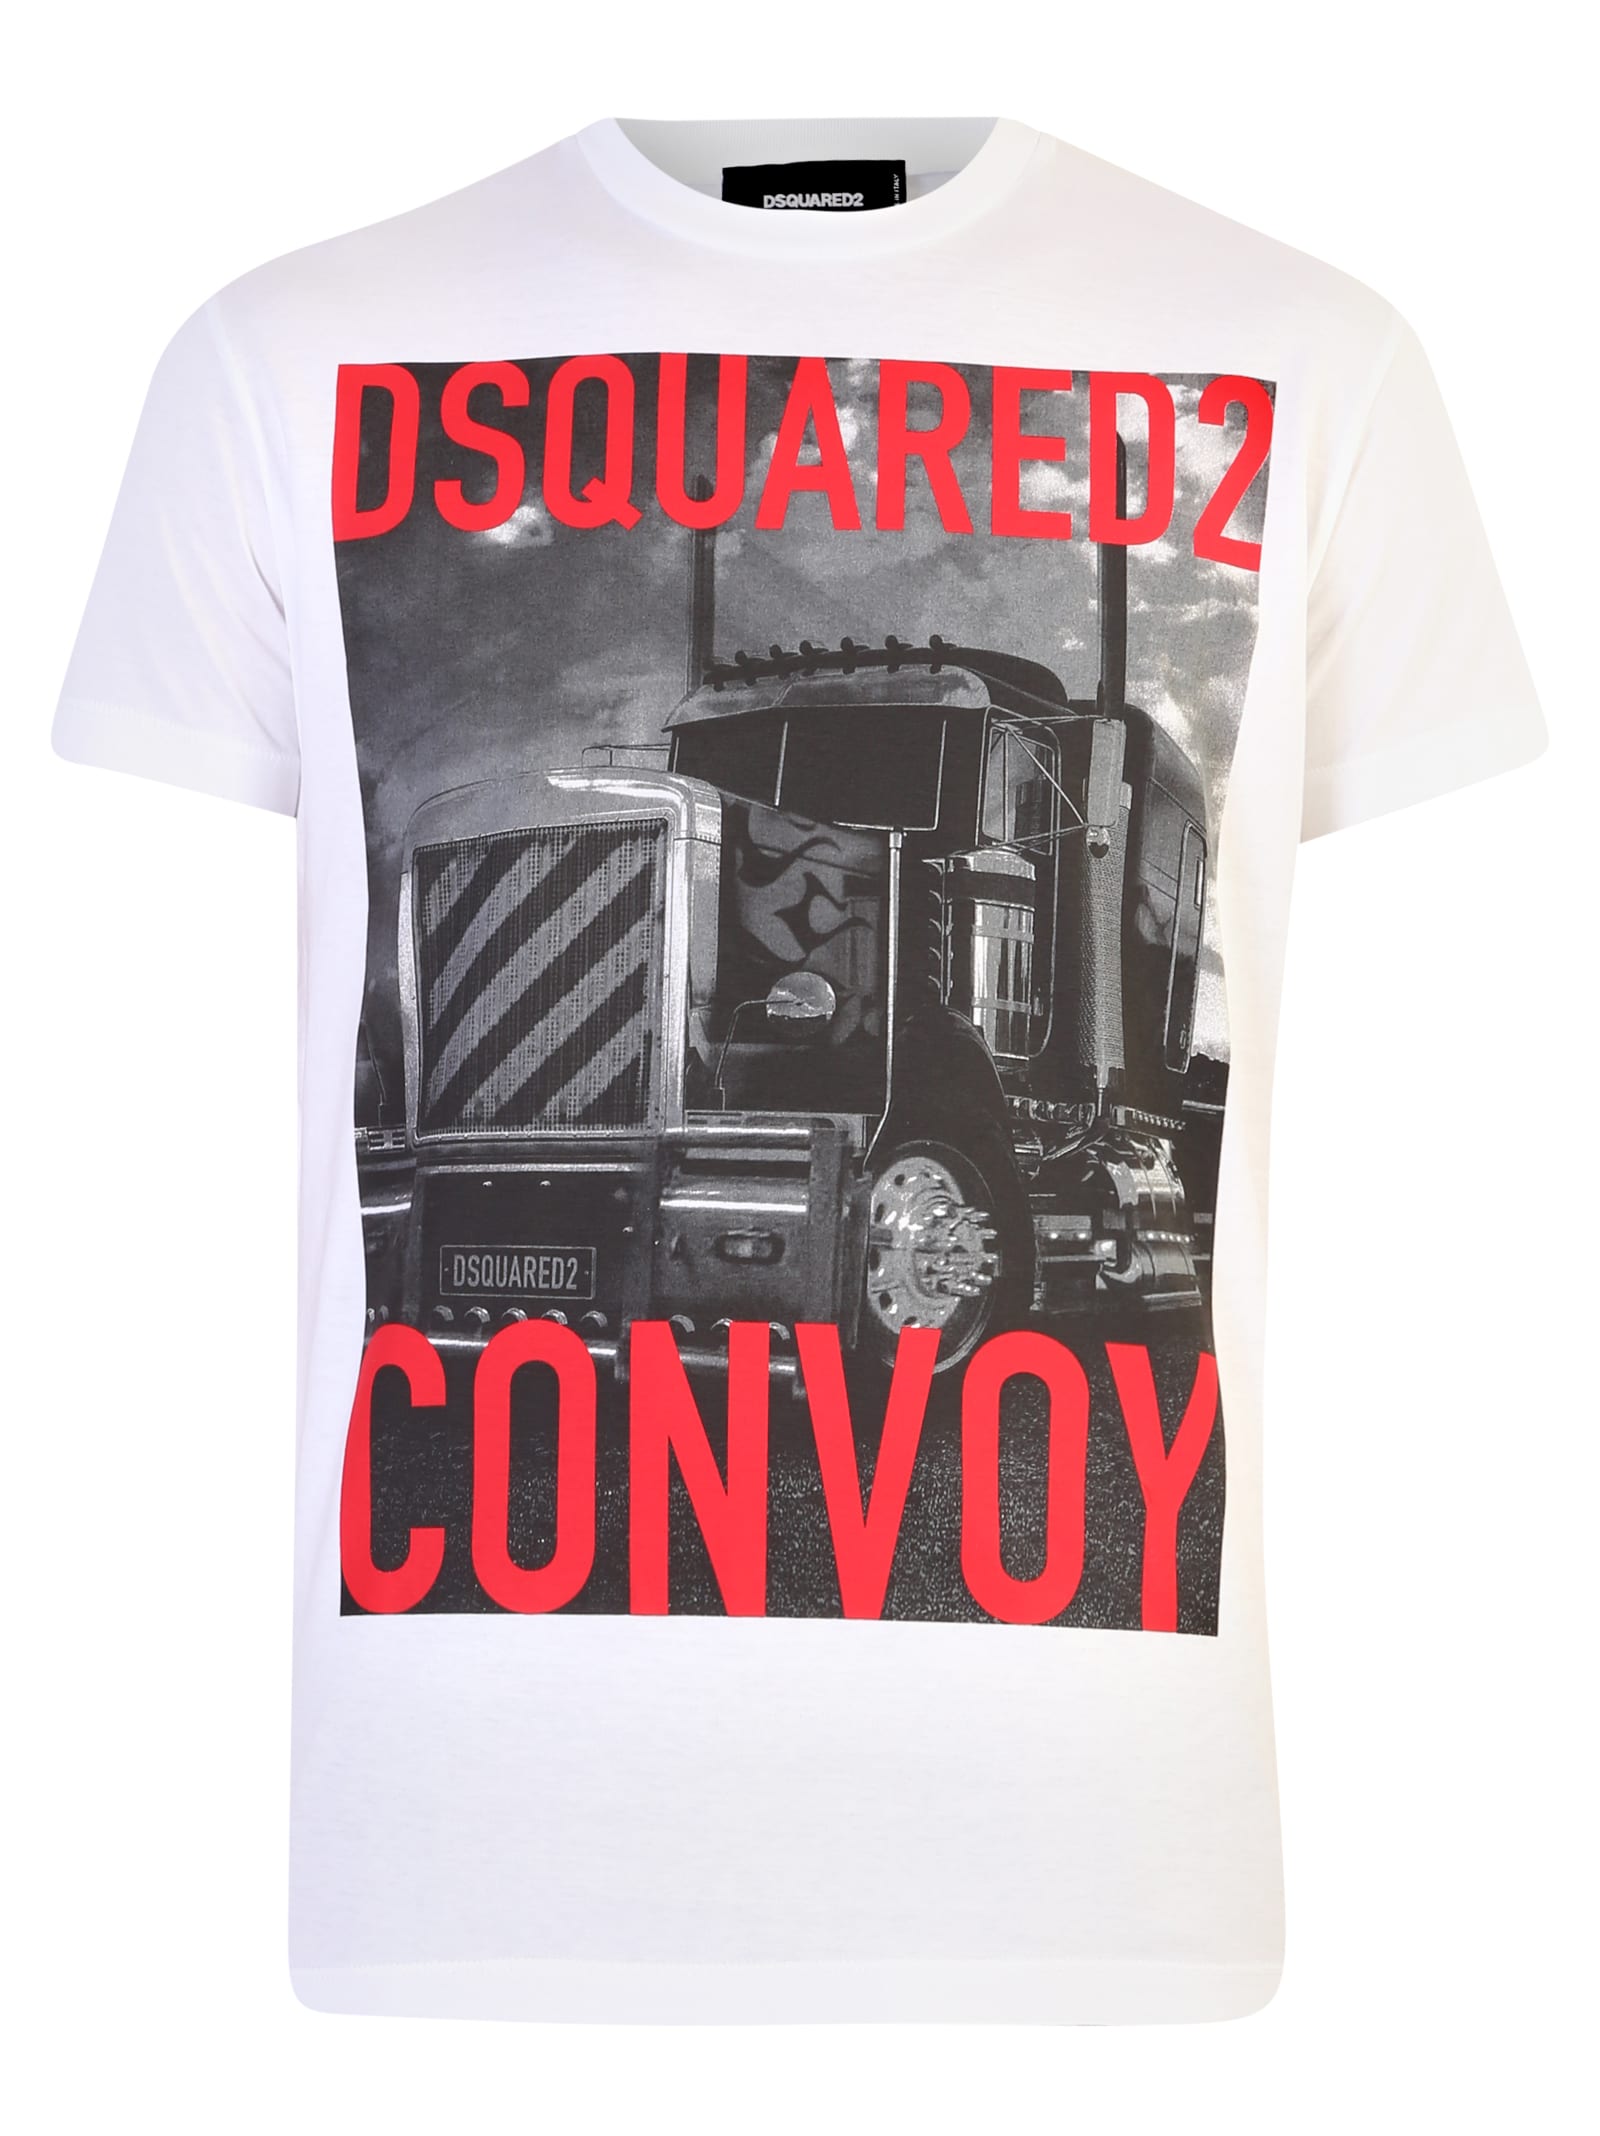 dsquared2 printed t shirt